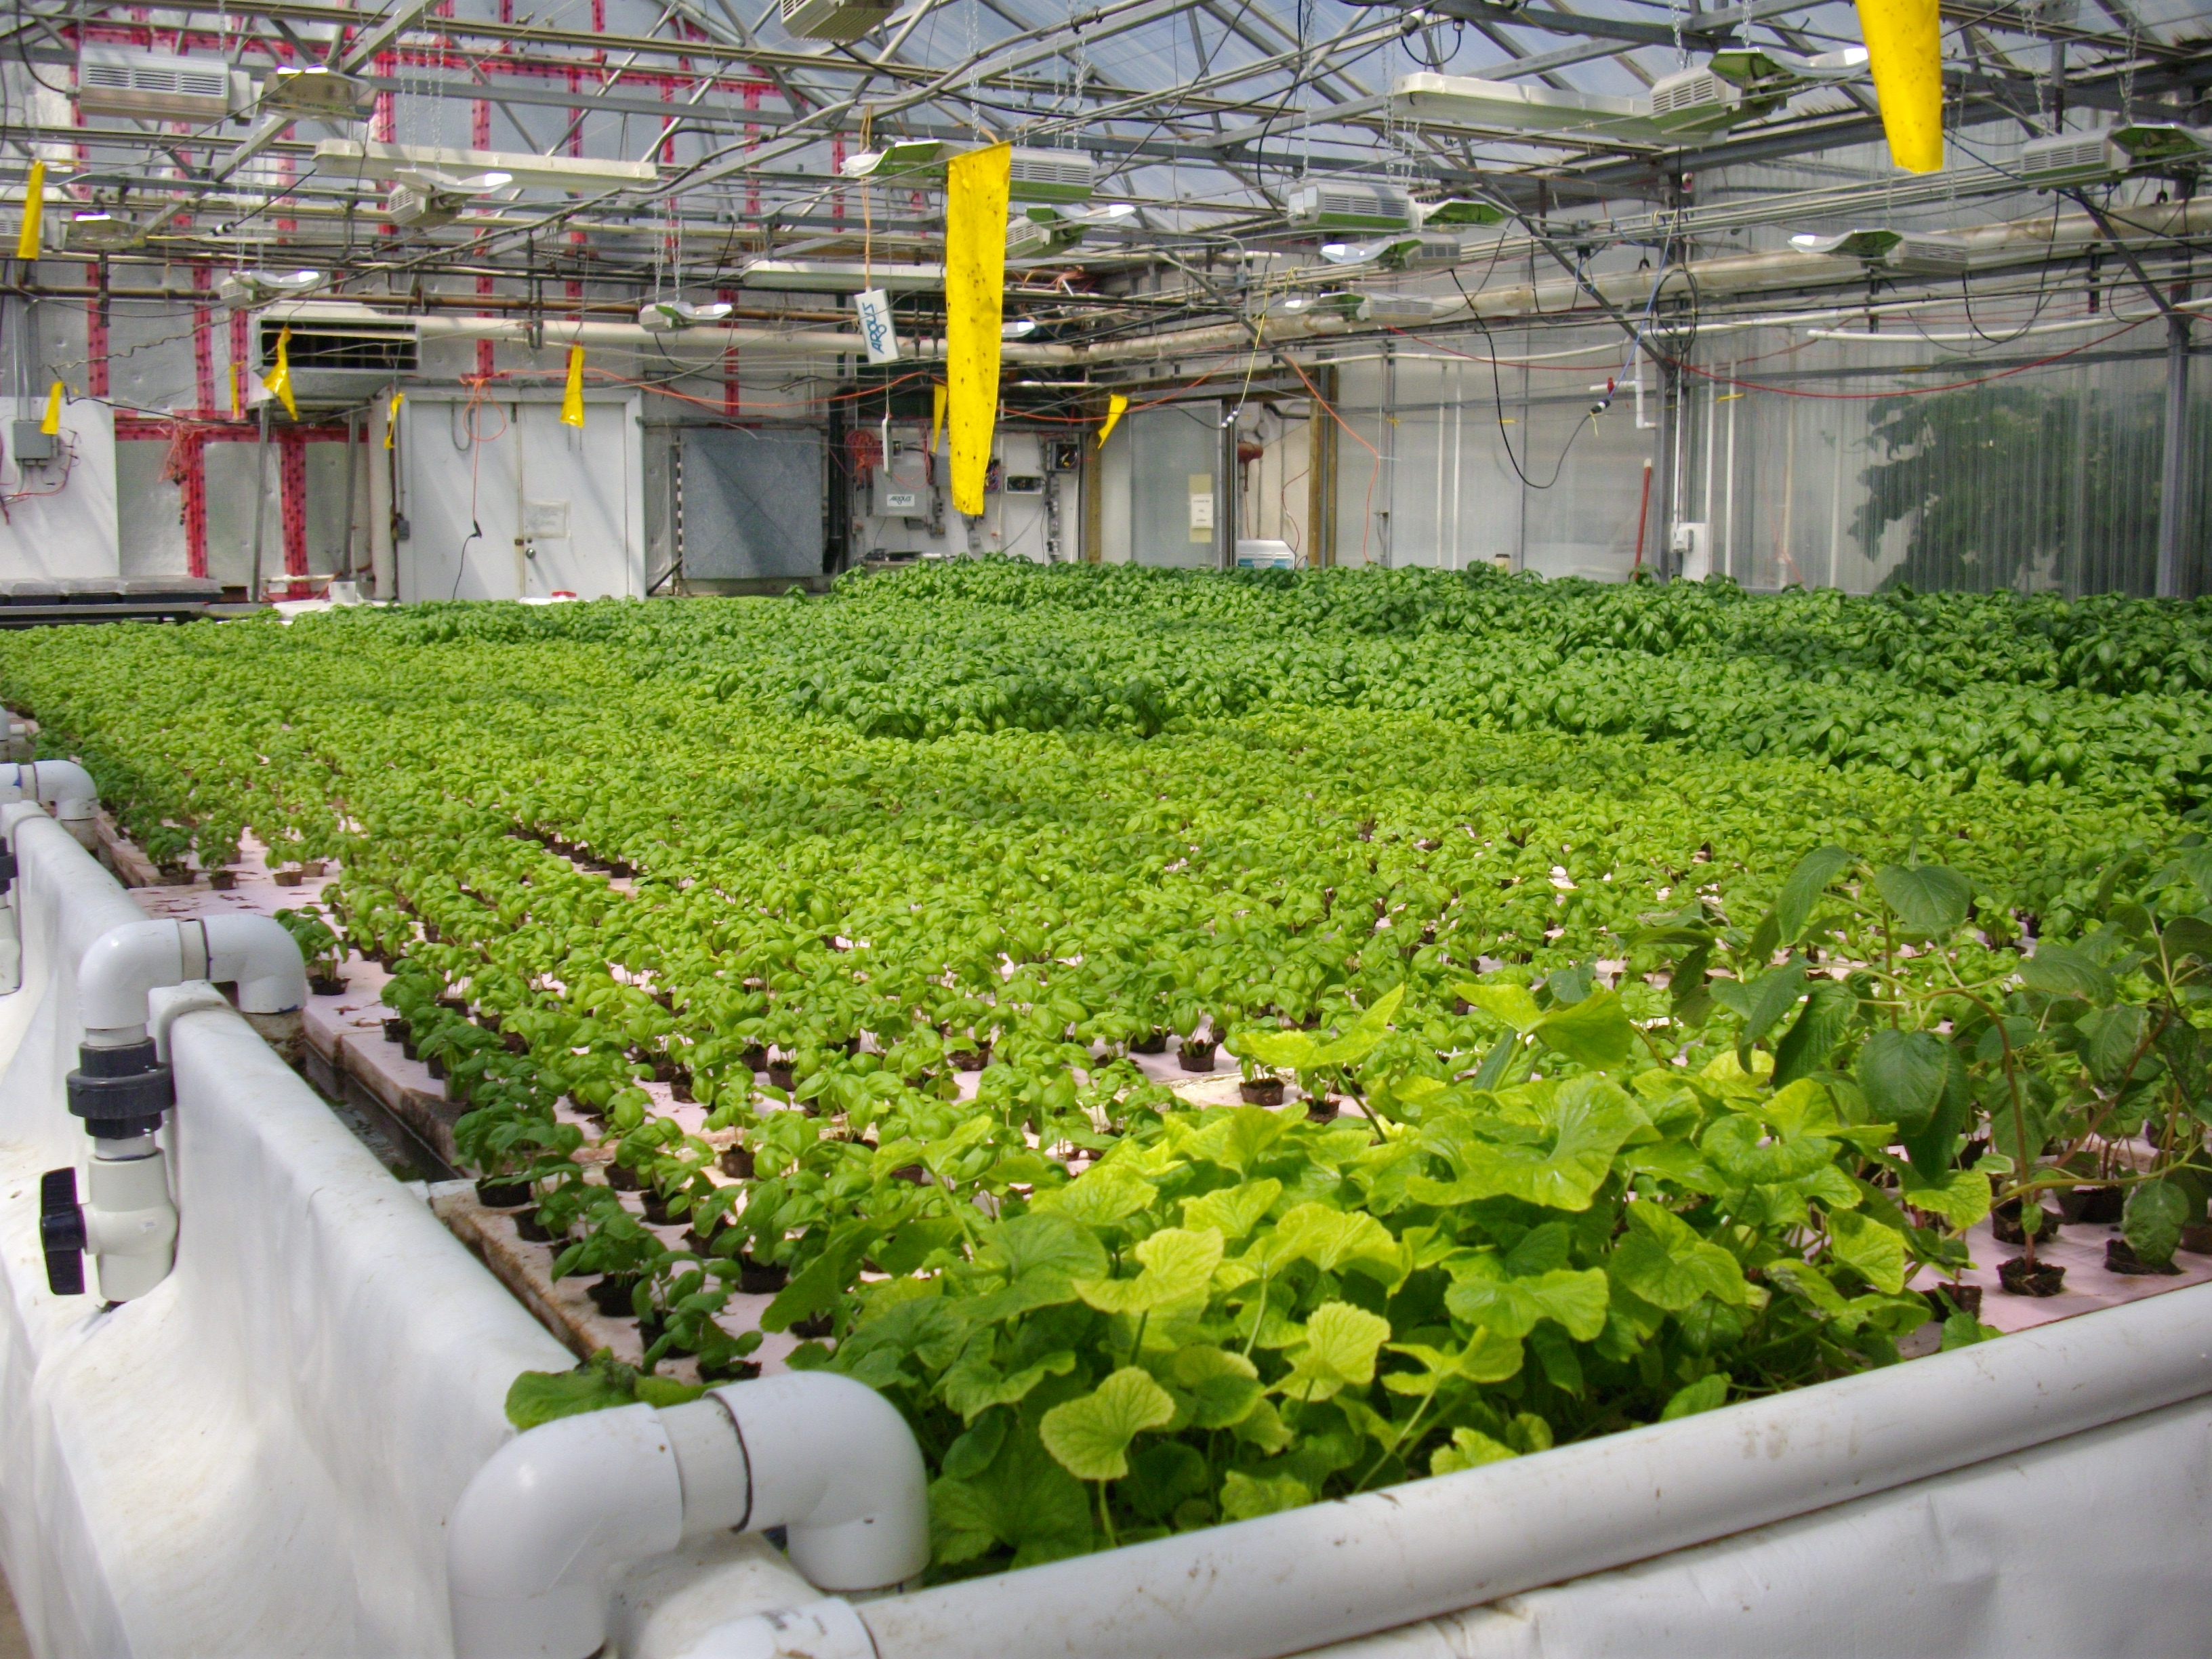 How to Automate an Aquaponic system?